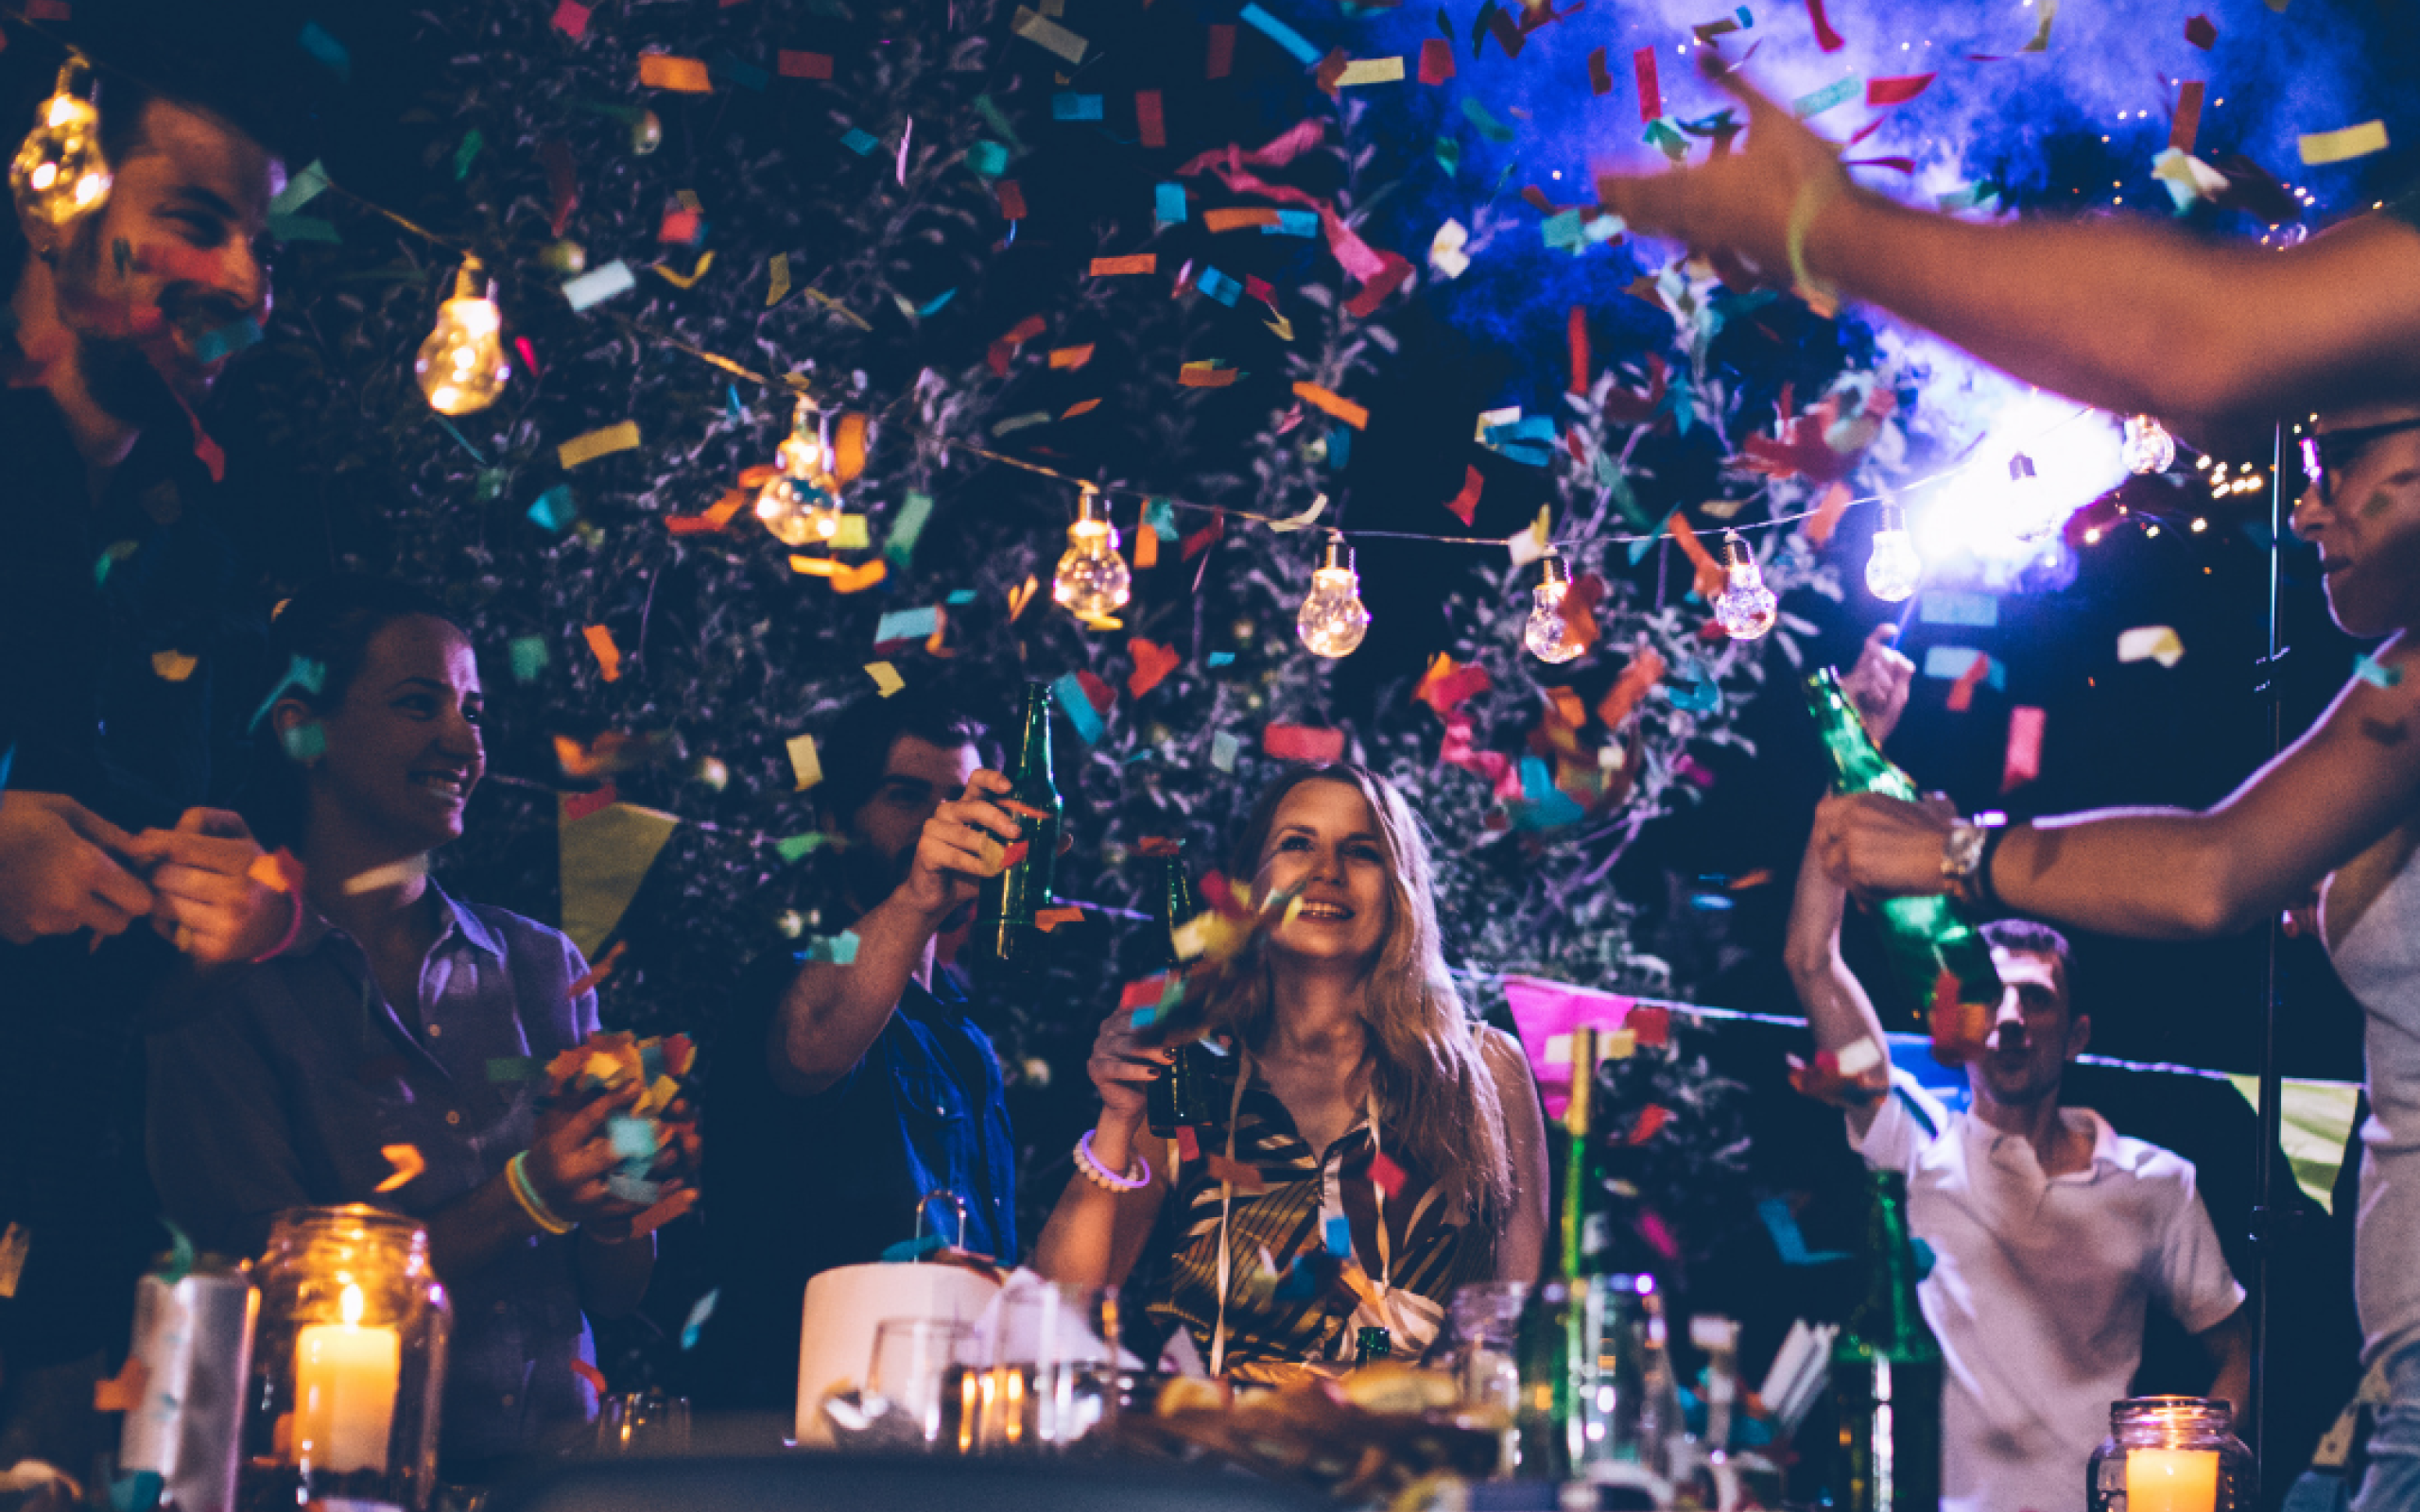 A group of people throws confetti around a table of food and drinks